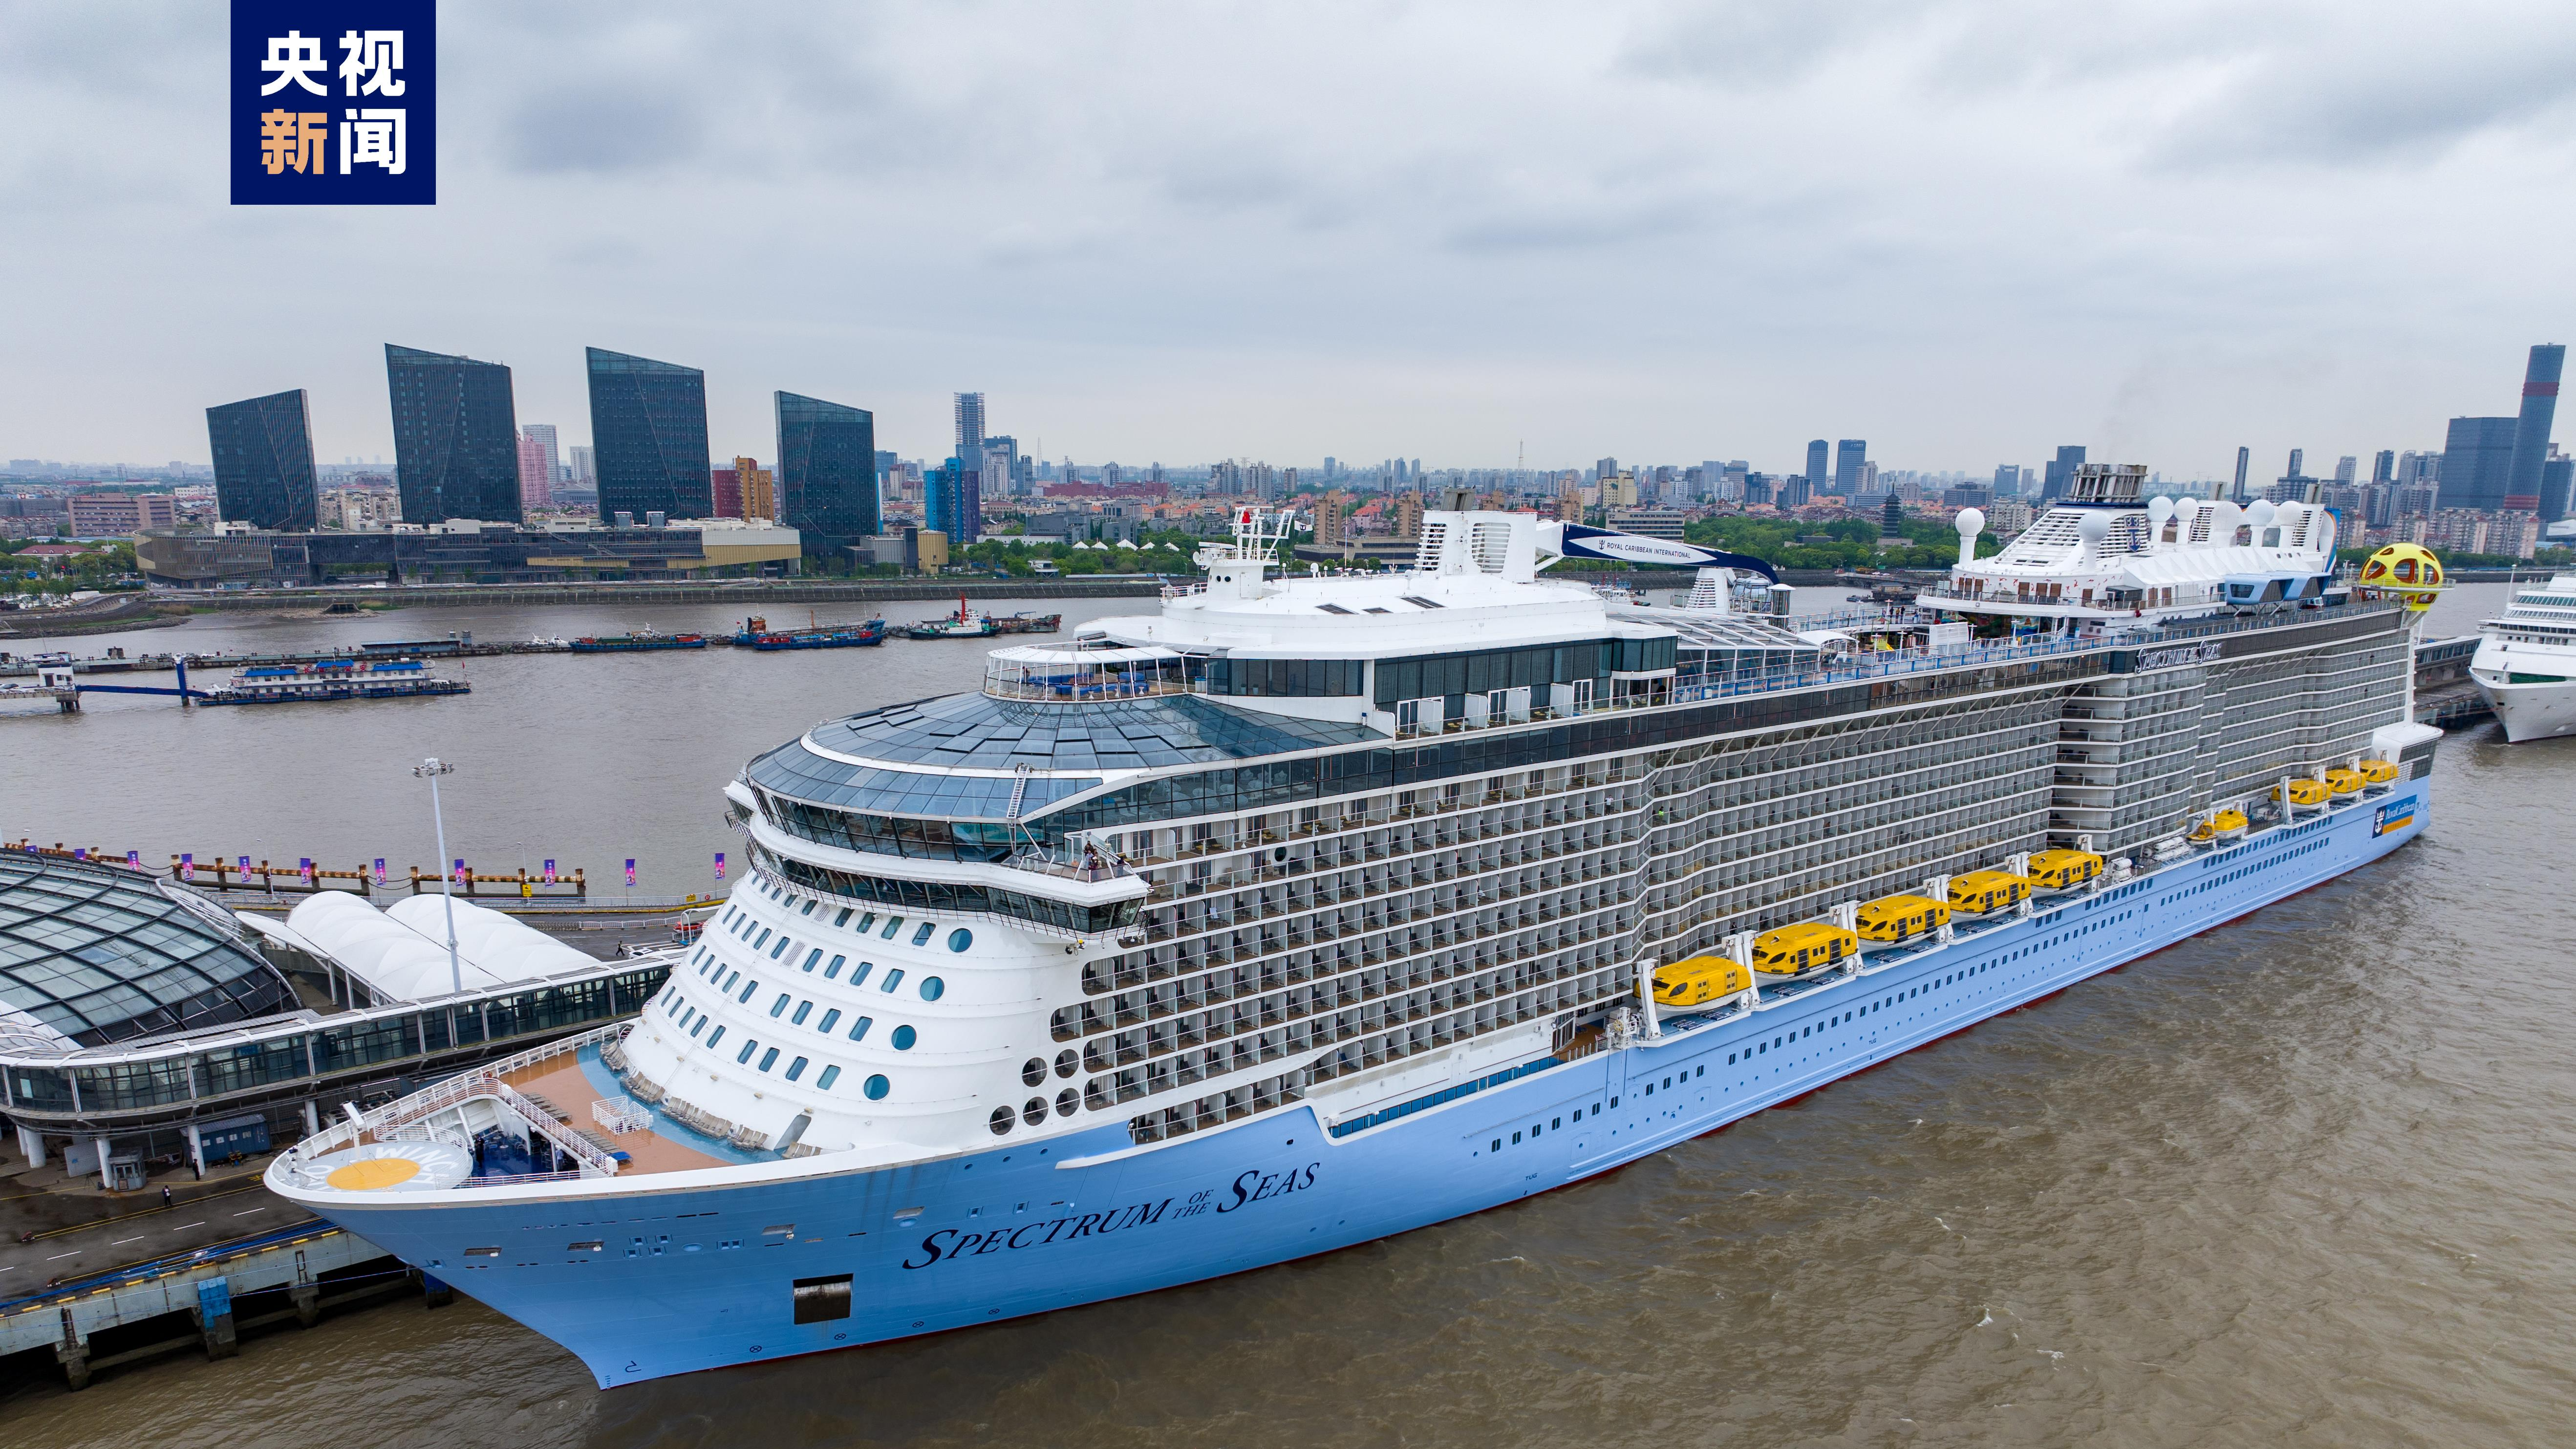 China’s cruise industry flourishes as international arrivals surge